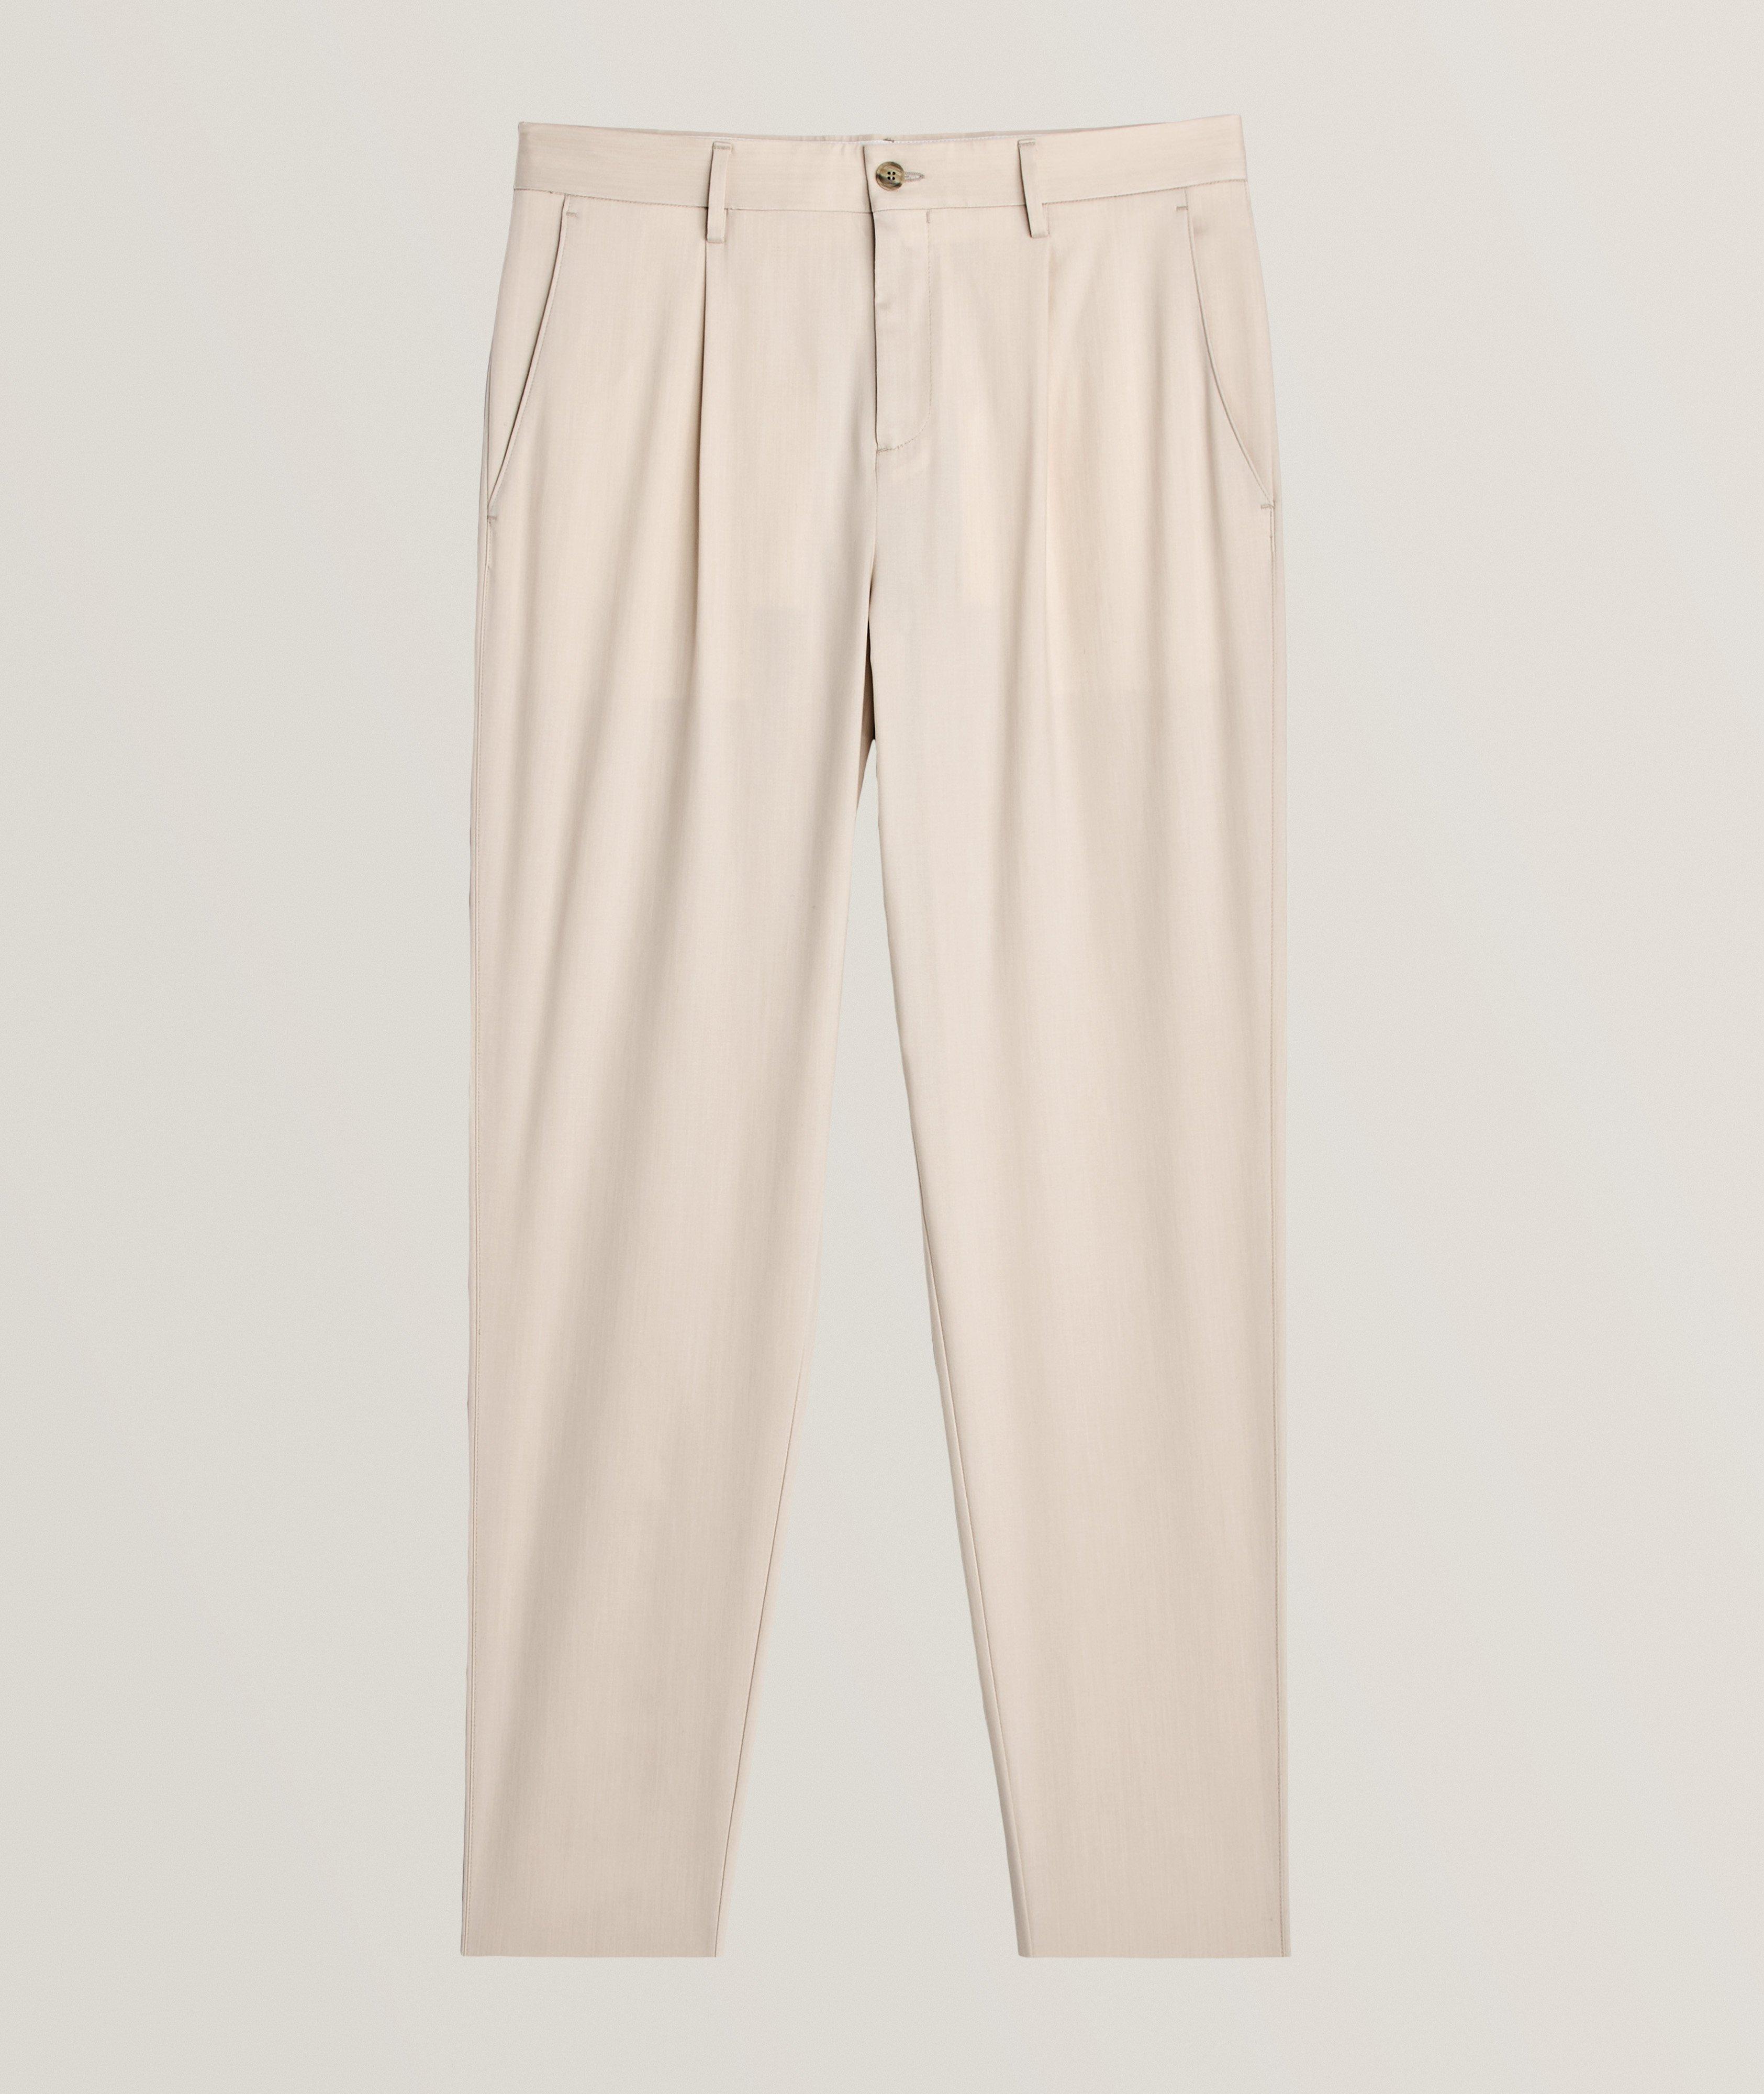 Solid Stretch-Lyocell Dress Pants image 0